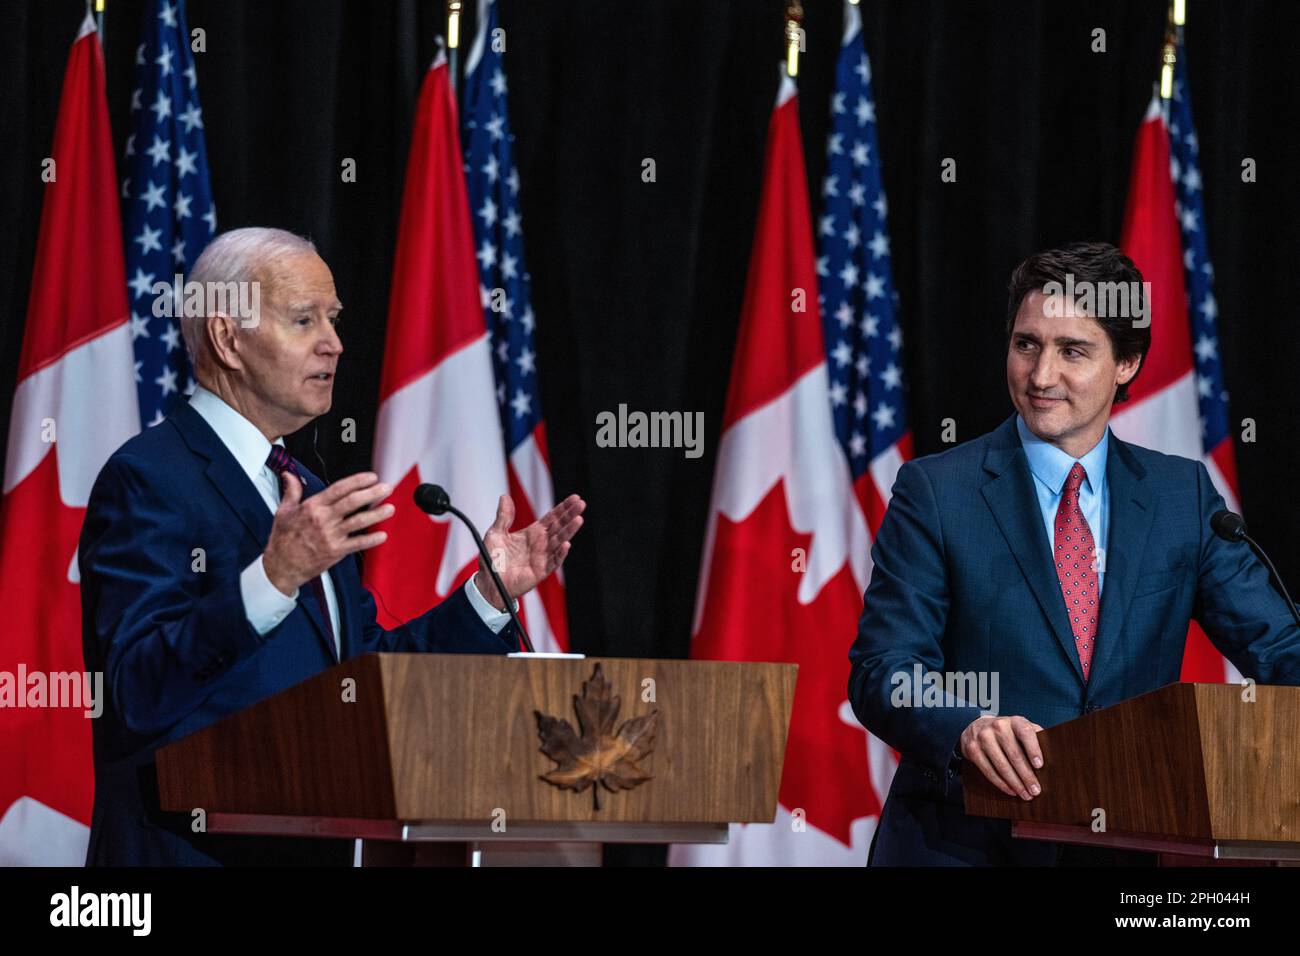 Ottawa, Canada. 24th Mar, 2023. U.S. President Joe Biden speaks during a joint press conference with Canadian Prime Minister Justin Trudeau at the Sir John A. Macdonald Building in Ottawa. This is the first official visit that the American president has made to Canada since becoming president. Though visits between elected presidents and the allied country typically take place sooner, Biden's inaugural visit to the northern neighbor was delayed due to COVID-19 travel restrictions. Credit: SOPA Images Limited/Alamy Live News Stock Photo